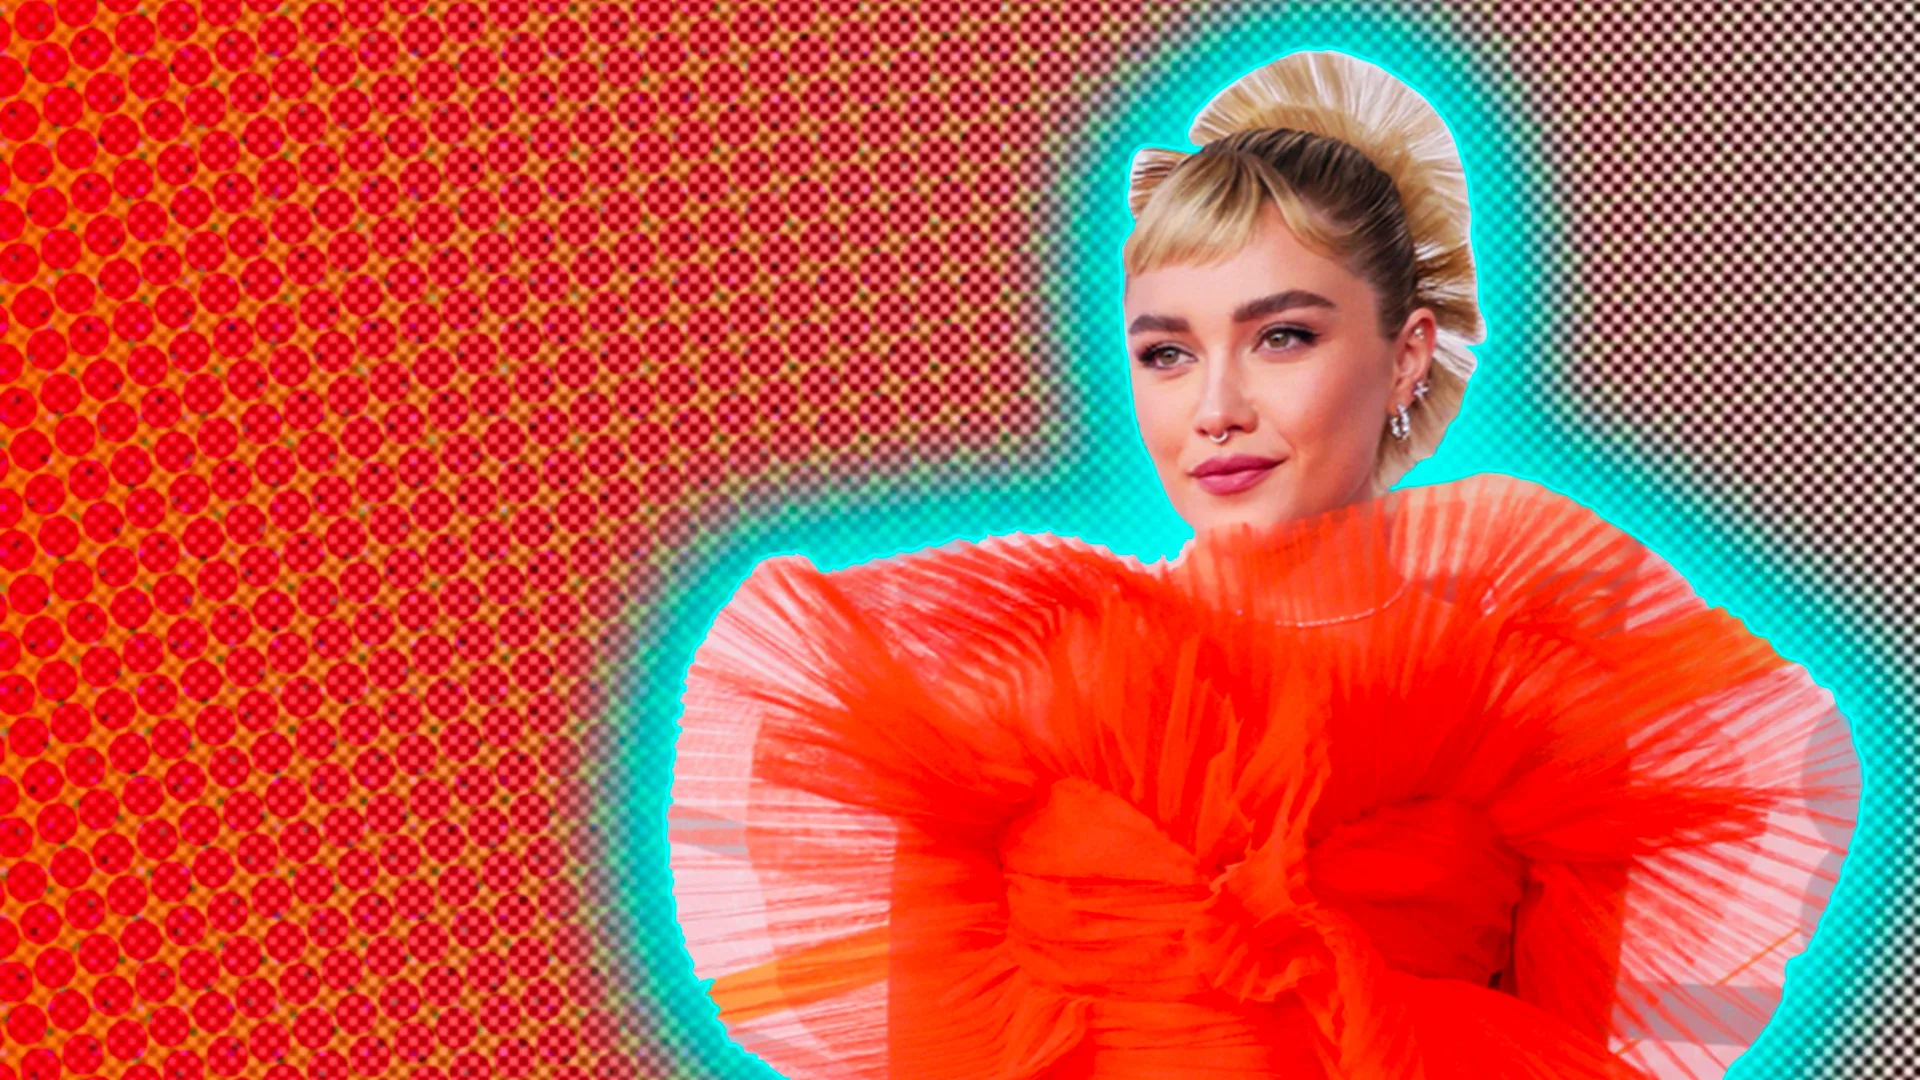 Actor Florence Pugh in a orange gown against a red background